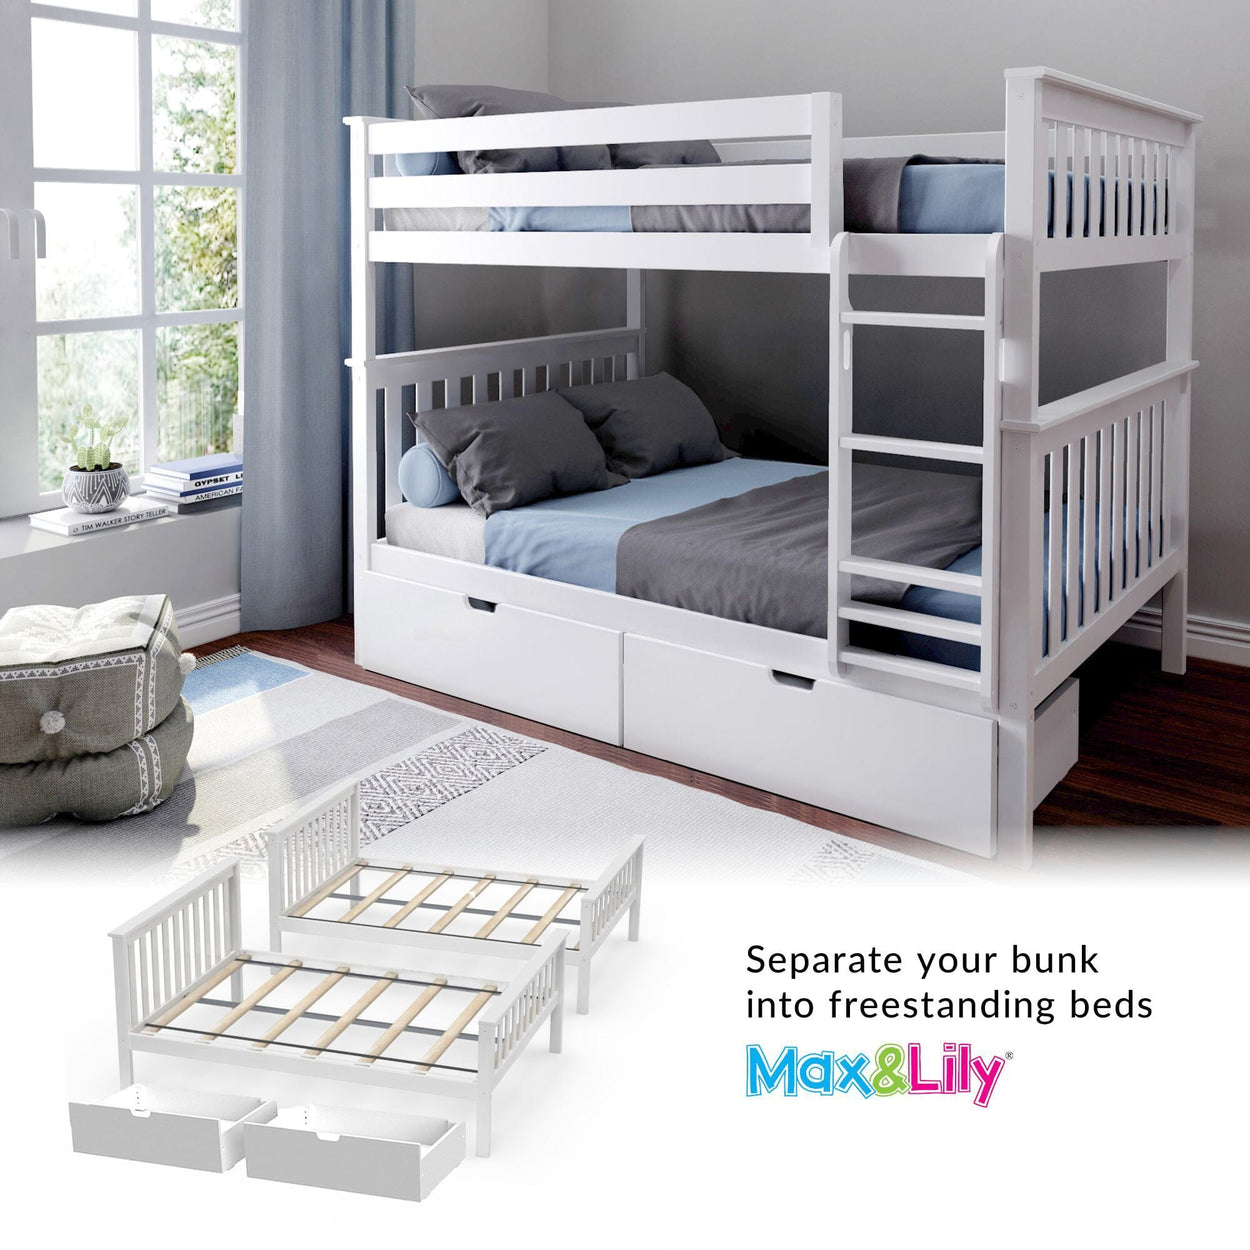 187251-002 : Bunk Beds Full Over Full Bunk Bed With Storage Drawers, White